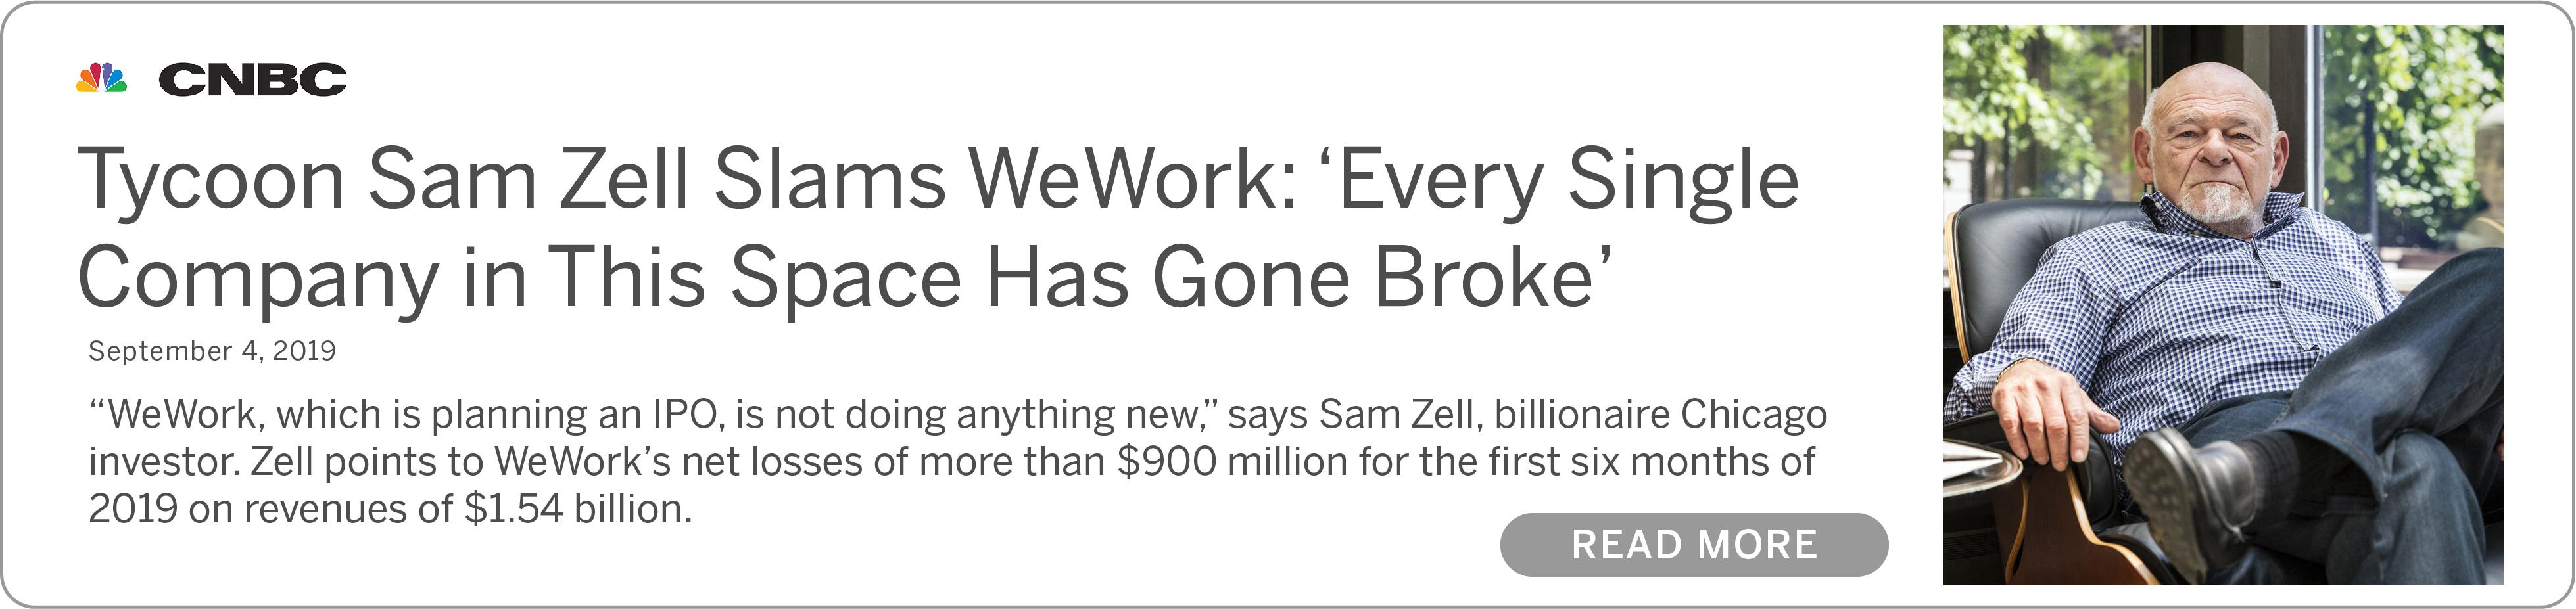 Tycoon Sam Zell Slams WeWork: 'Every Single Company in This Space Has Gone Broke'